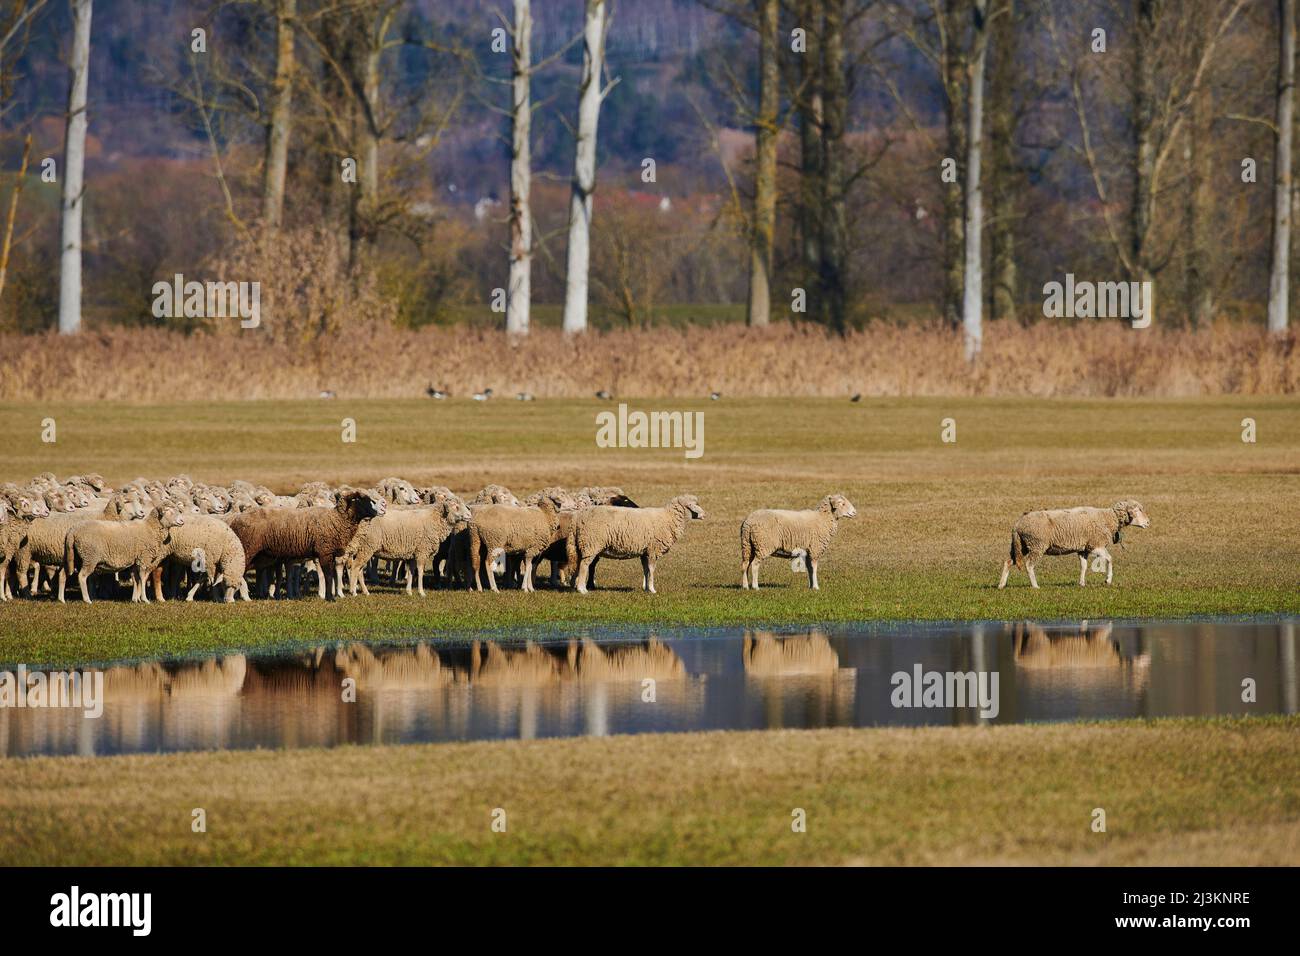 A sheep (Ovis aries) walking away from the flock as they stand on a meadow with water puddles; Upper Palatinate, Bavaria, Germany Stock Photo